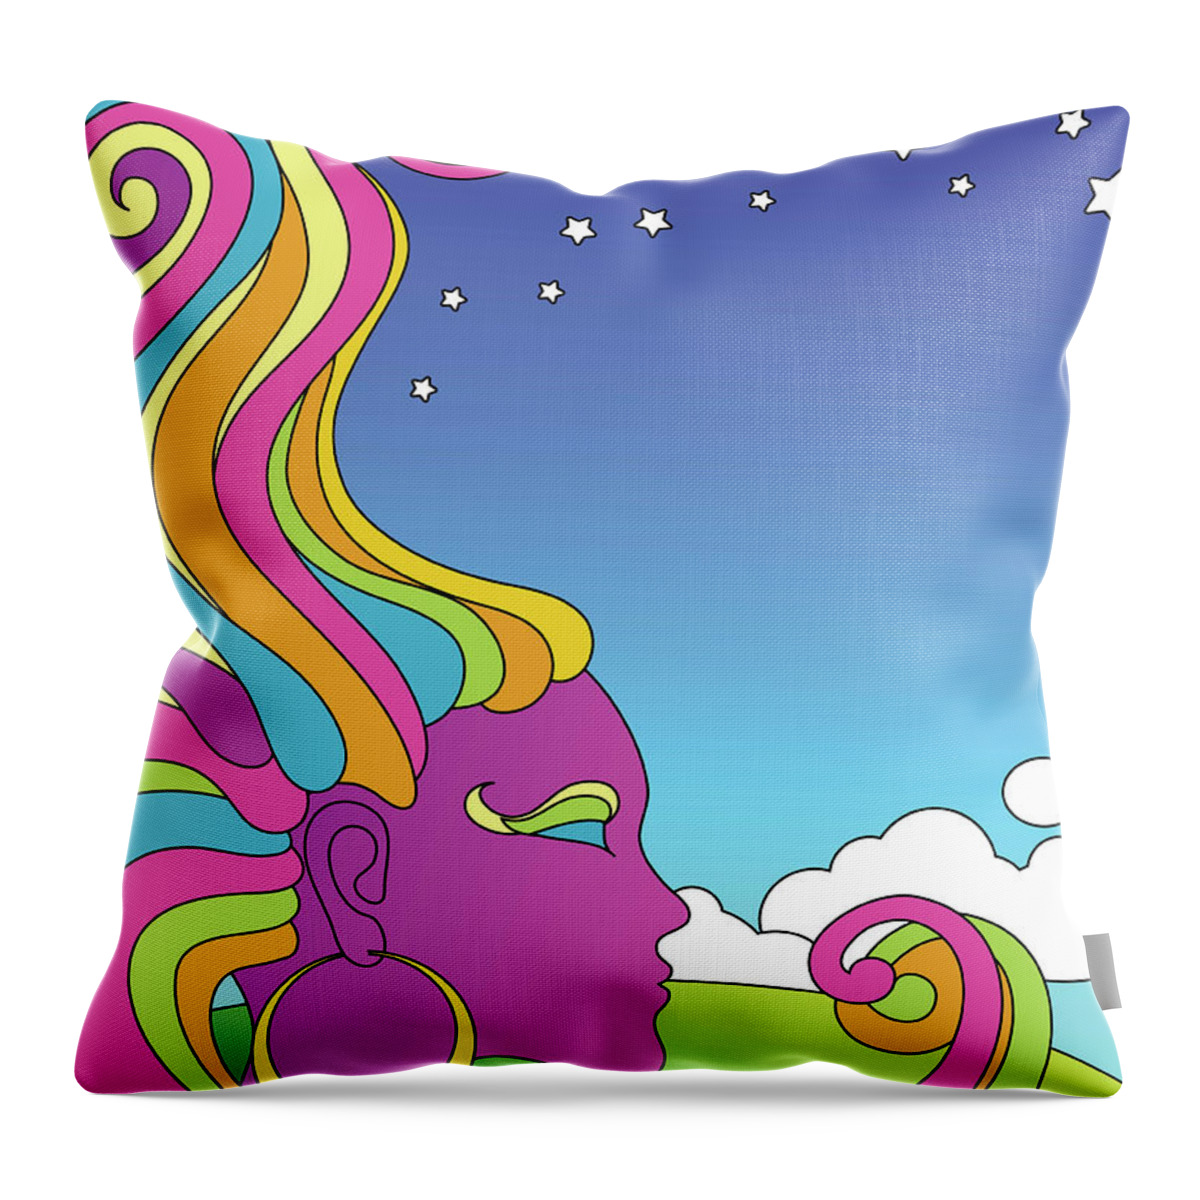 Rock Music Throw Pillow featuring the digital art Vector Illustration Of Psychedelic by Teddyandmia